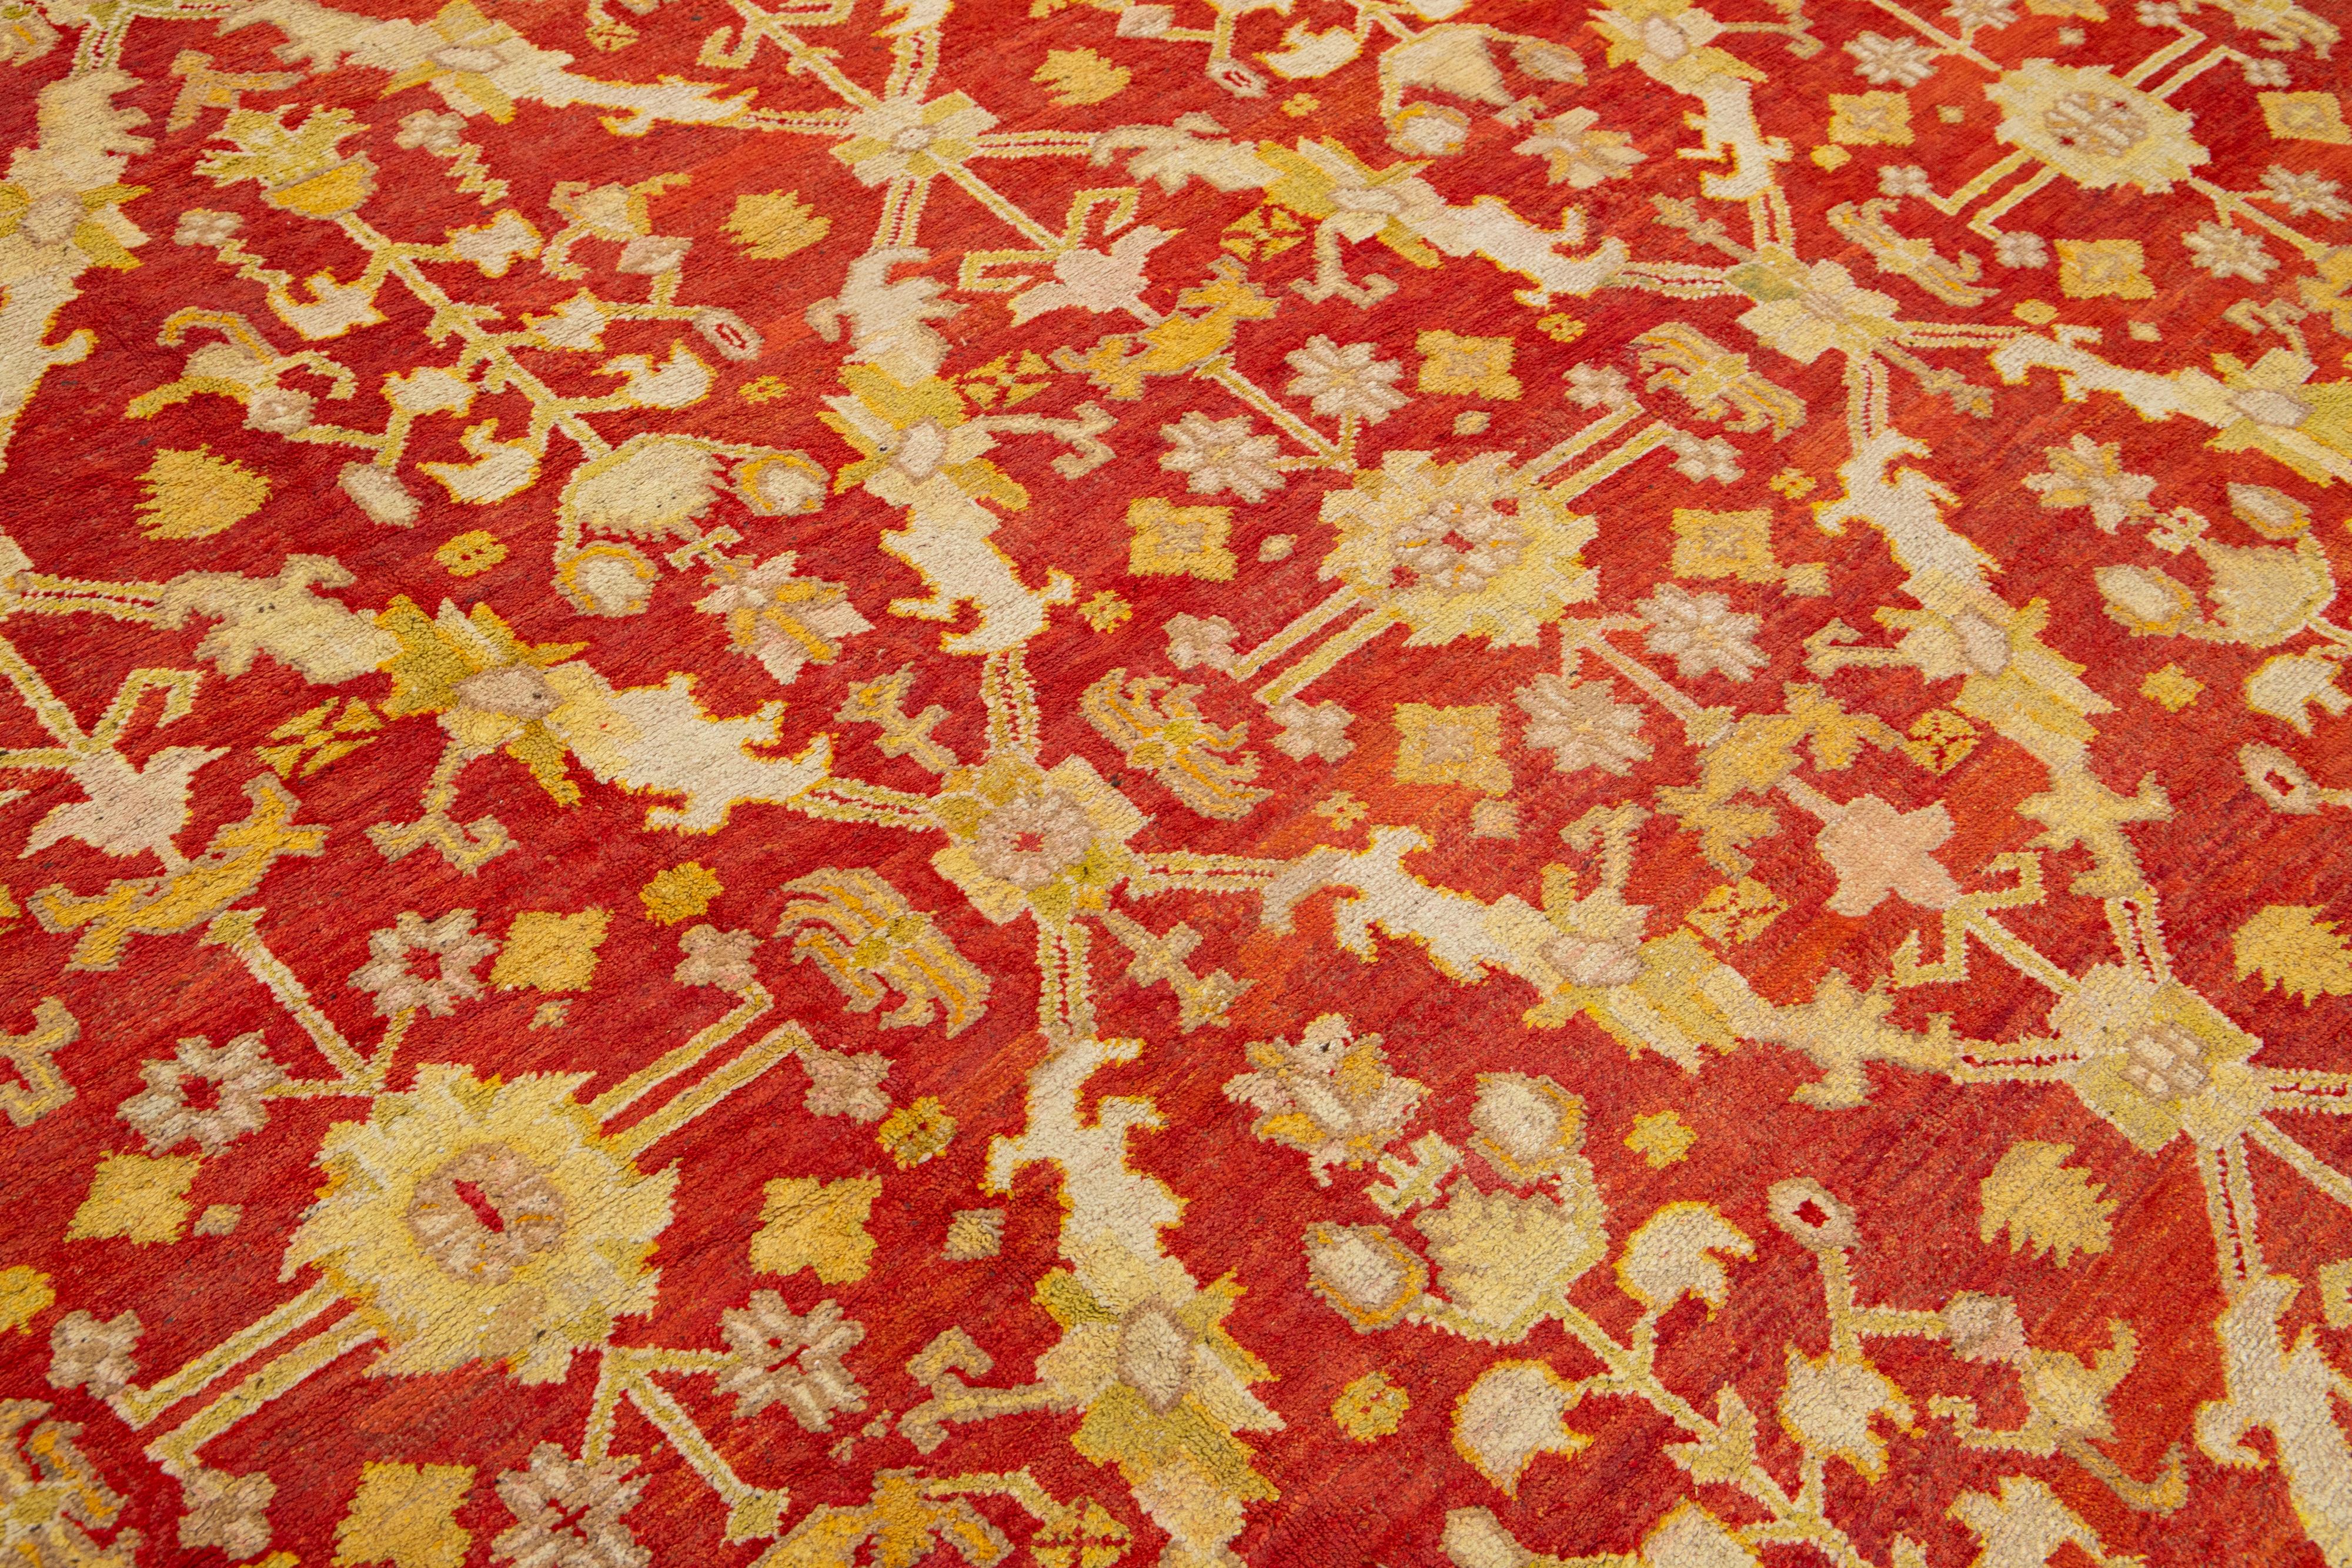 Handmade Red Turkish Oushak Wool Rug Featuring a Floral Pattern From The 1880's For Sale 3